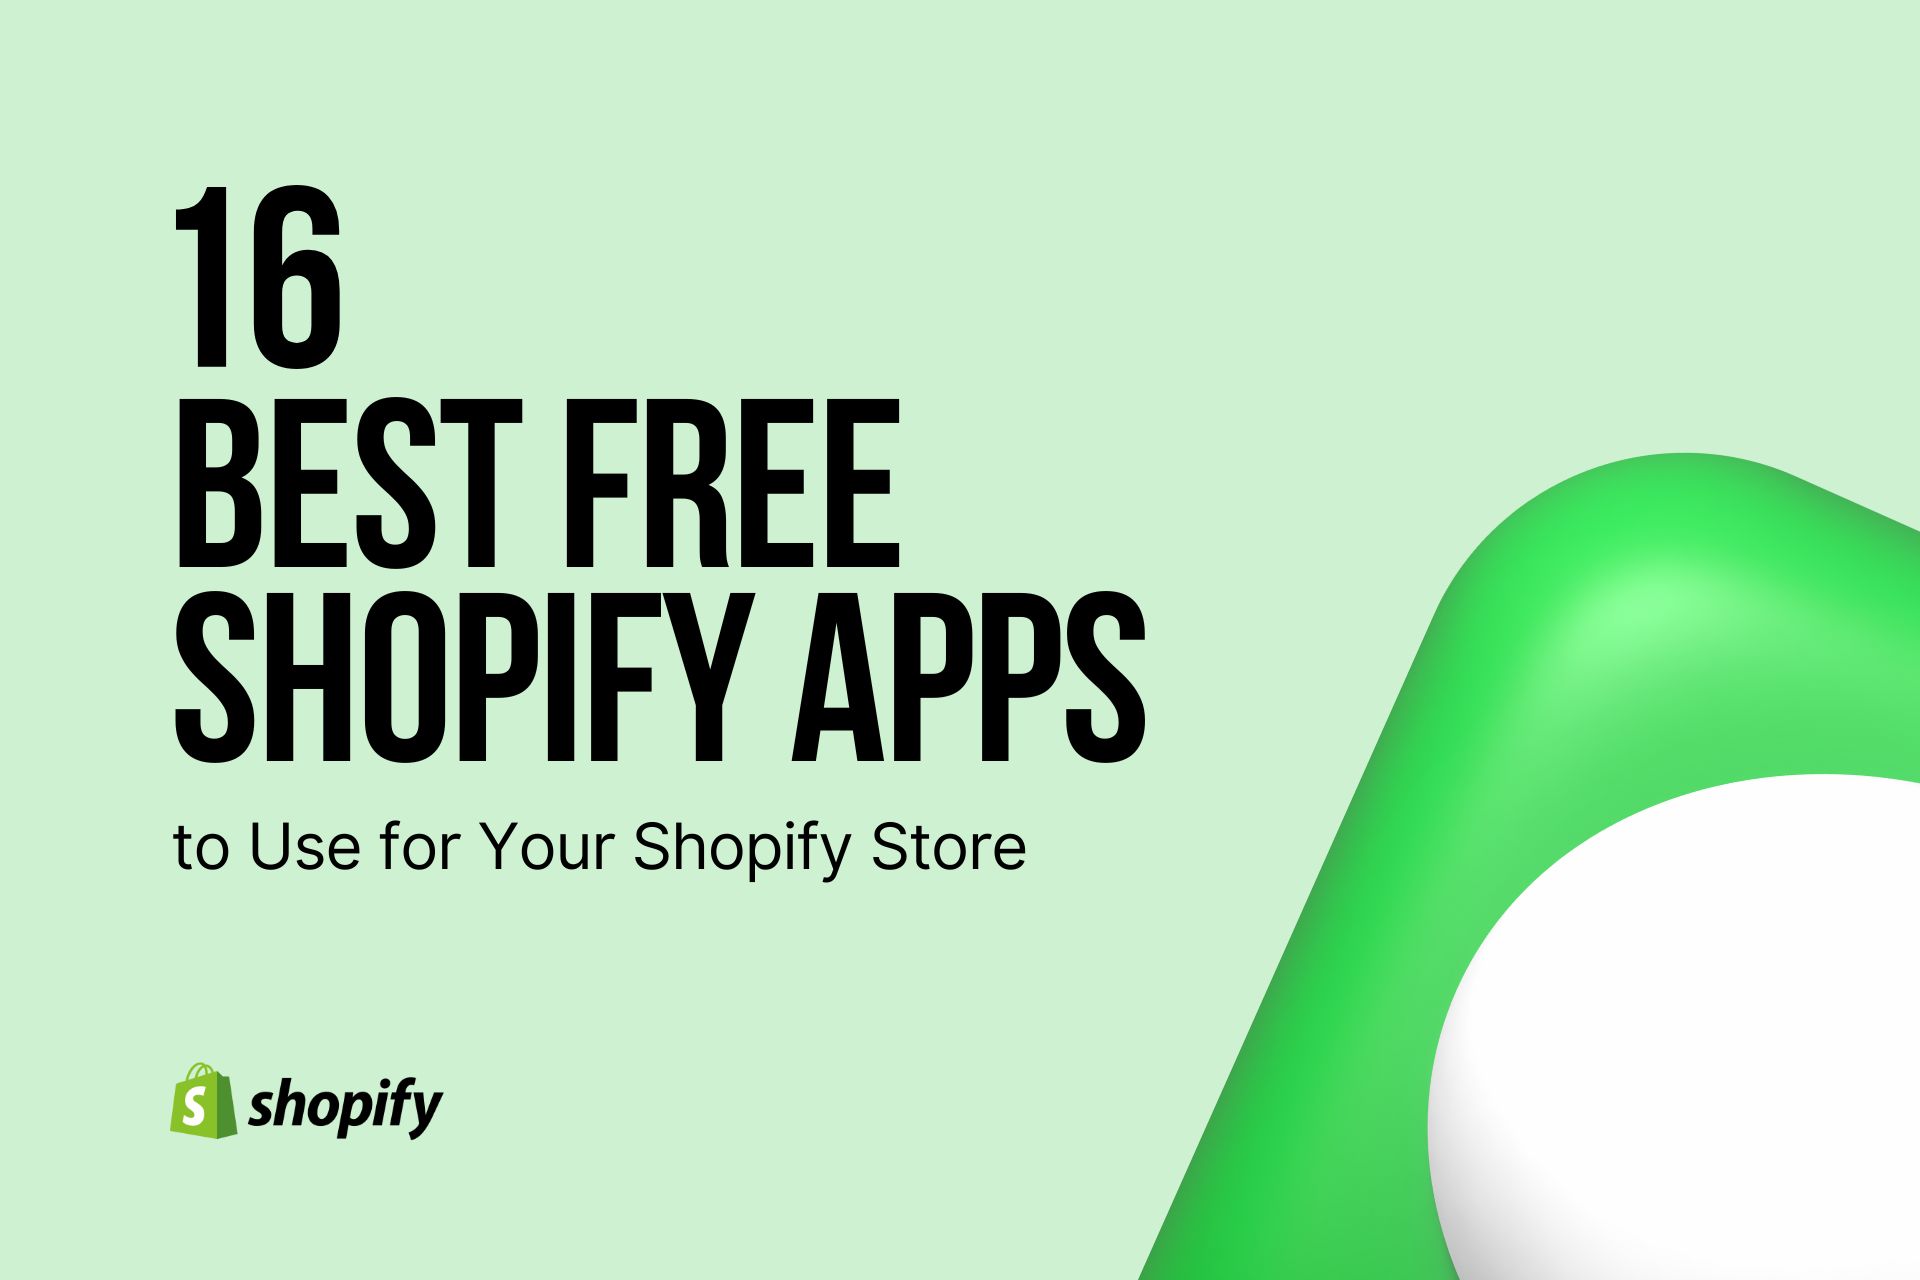 16 Best Free Shopify Apps to Use for Your Shopify Store